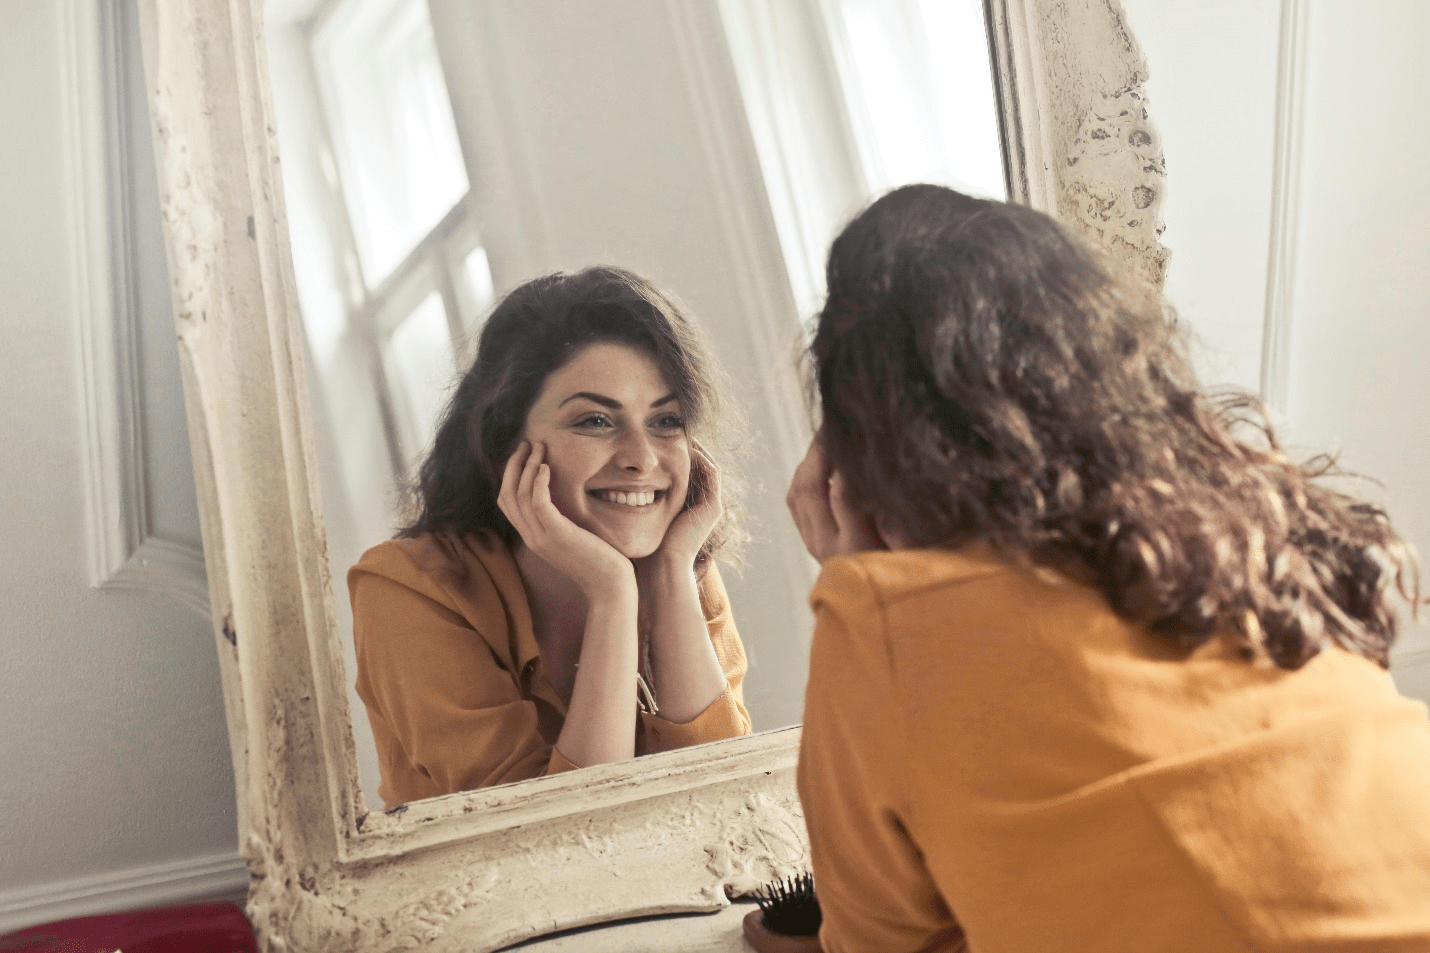 A woman smiling in the mirror.